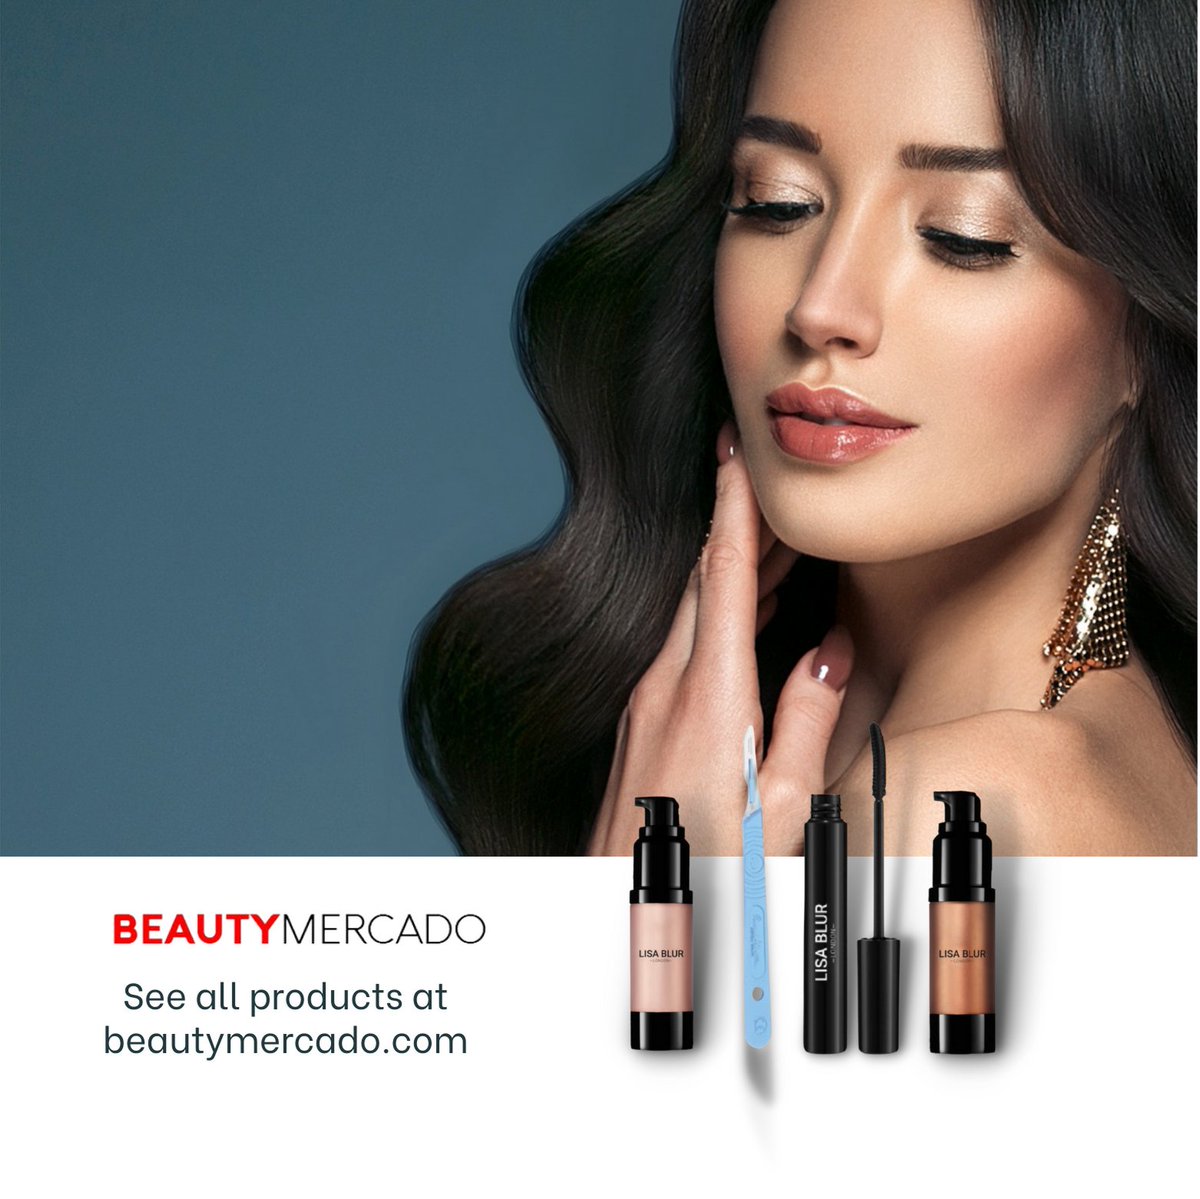 Unleash your feminine allure with Beauty Mercado's collection of cosmetics, skincare, and fragrances. Let your beauty shine from within. Choose yours at beautymercado.com
.
.
.
#beautyproducts #skincare #makeup #cosmetics #eaudeparfum #glowingskin #selfcare #beautytips